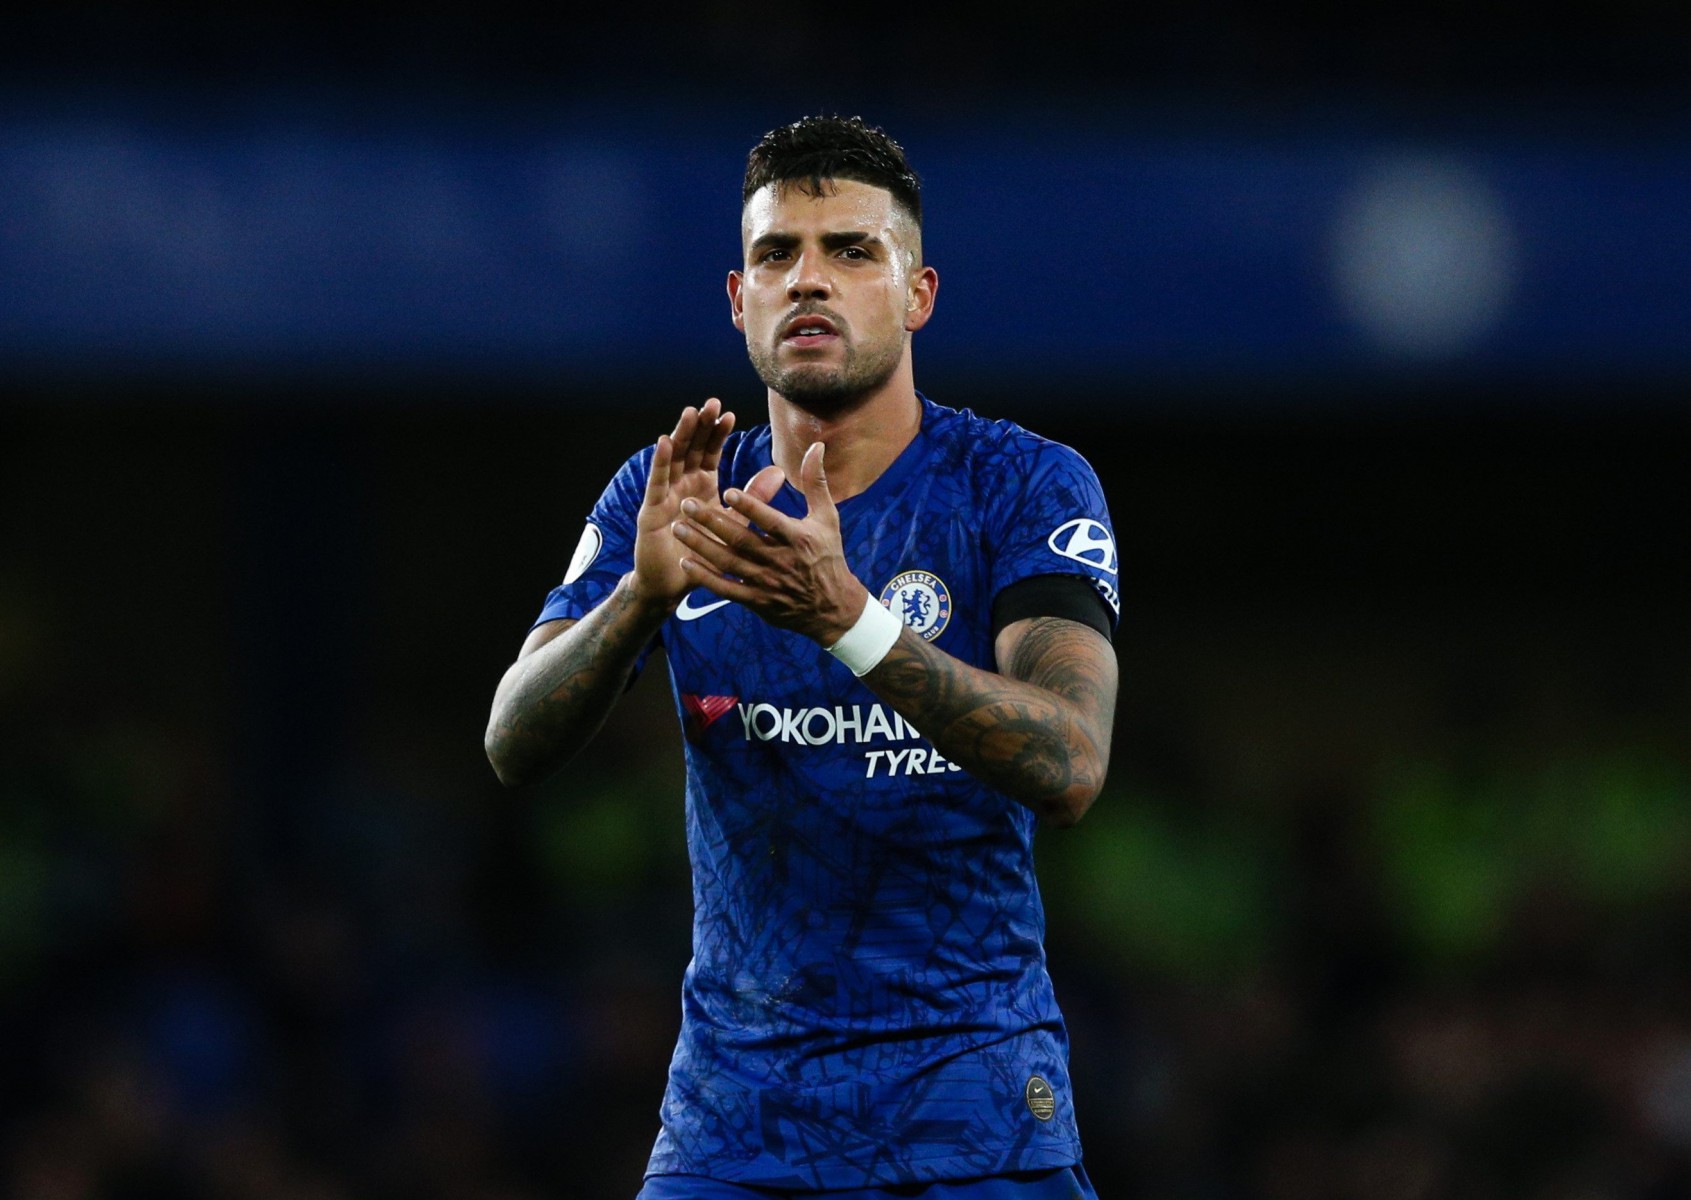 , Chelsea star Emerson Palmieri eyed by Juventus as transfer cover for injury-prone Alex Sandro